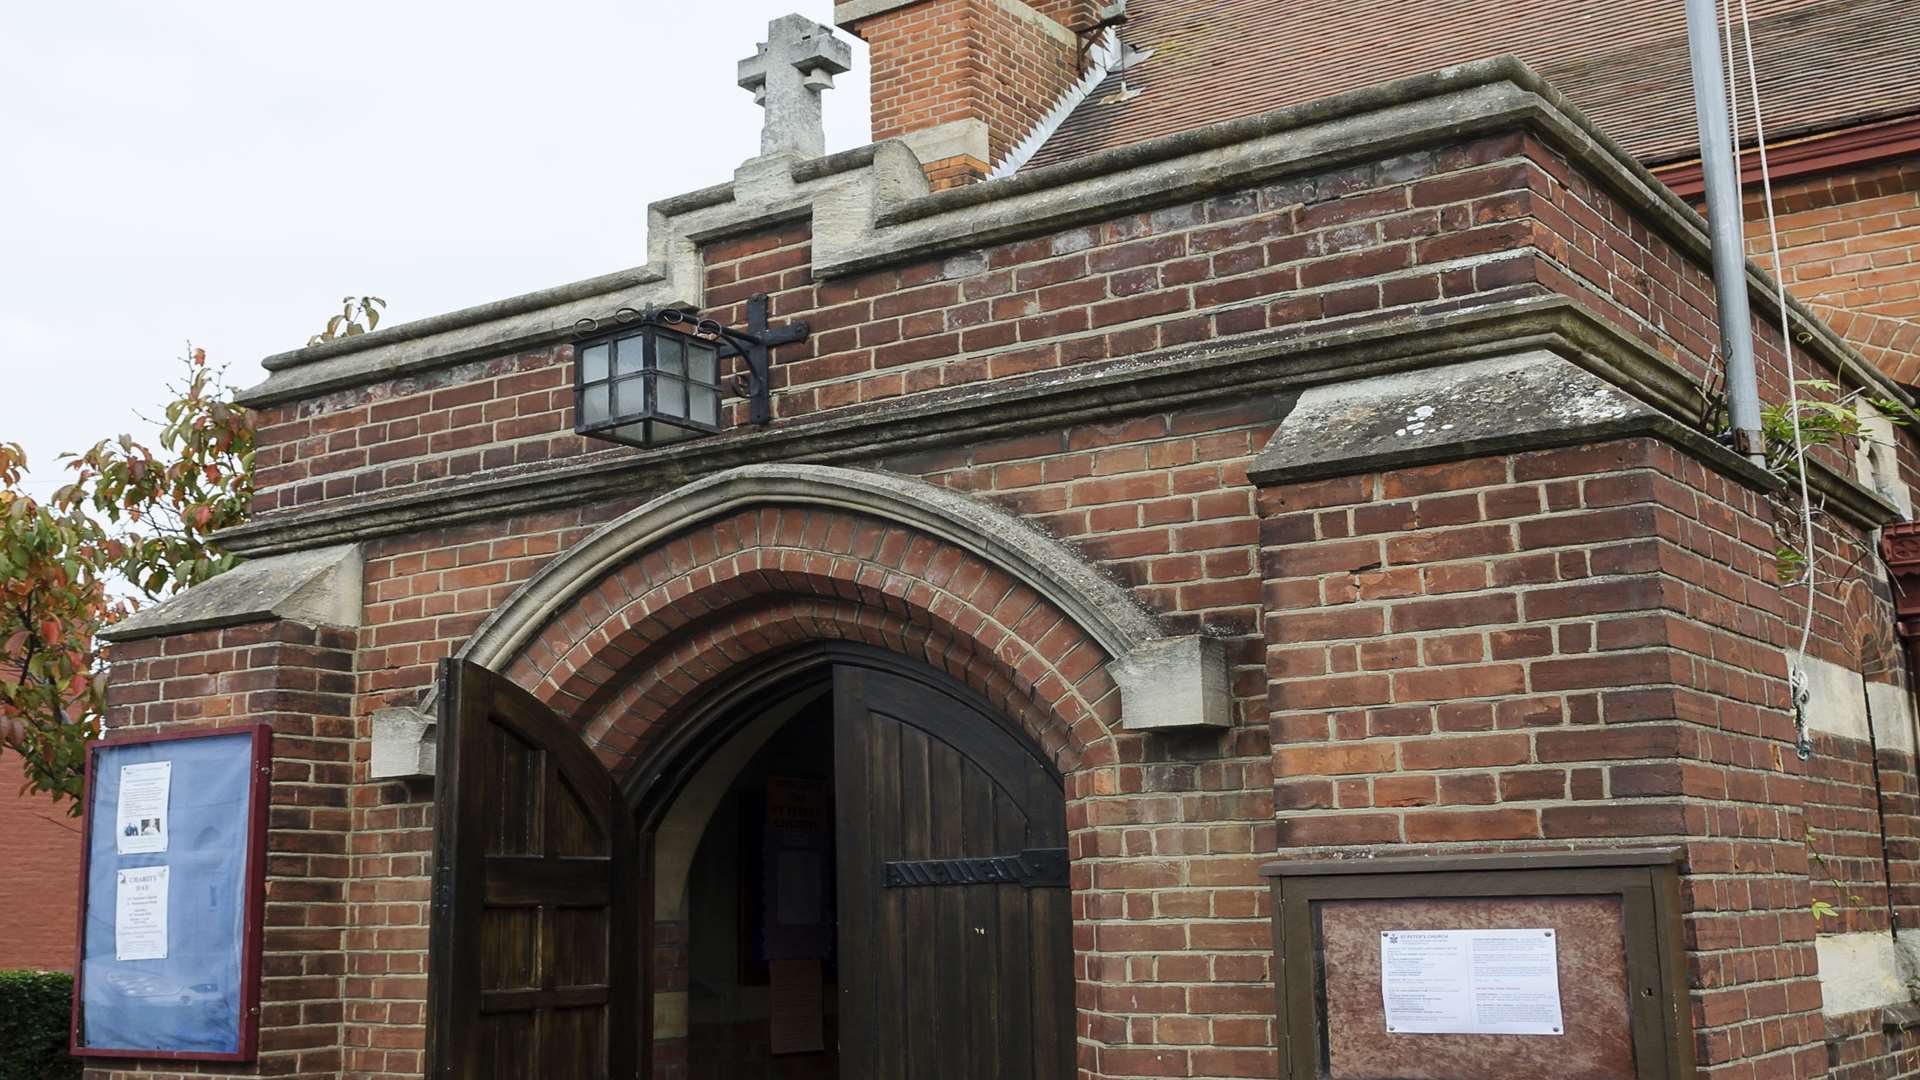 St Peter's church was targeted by thieves.